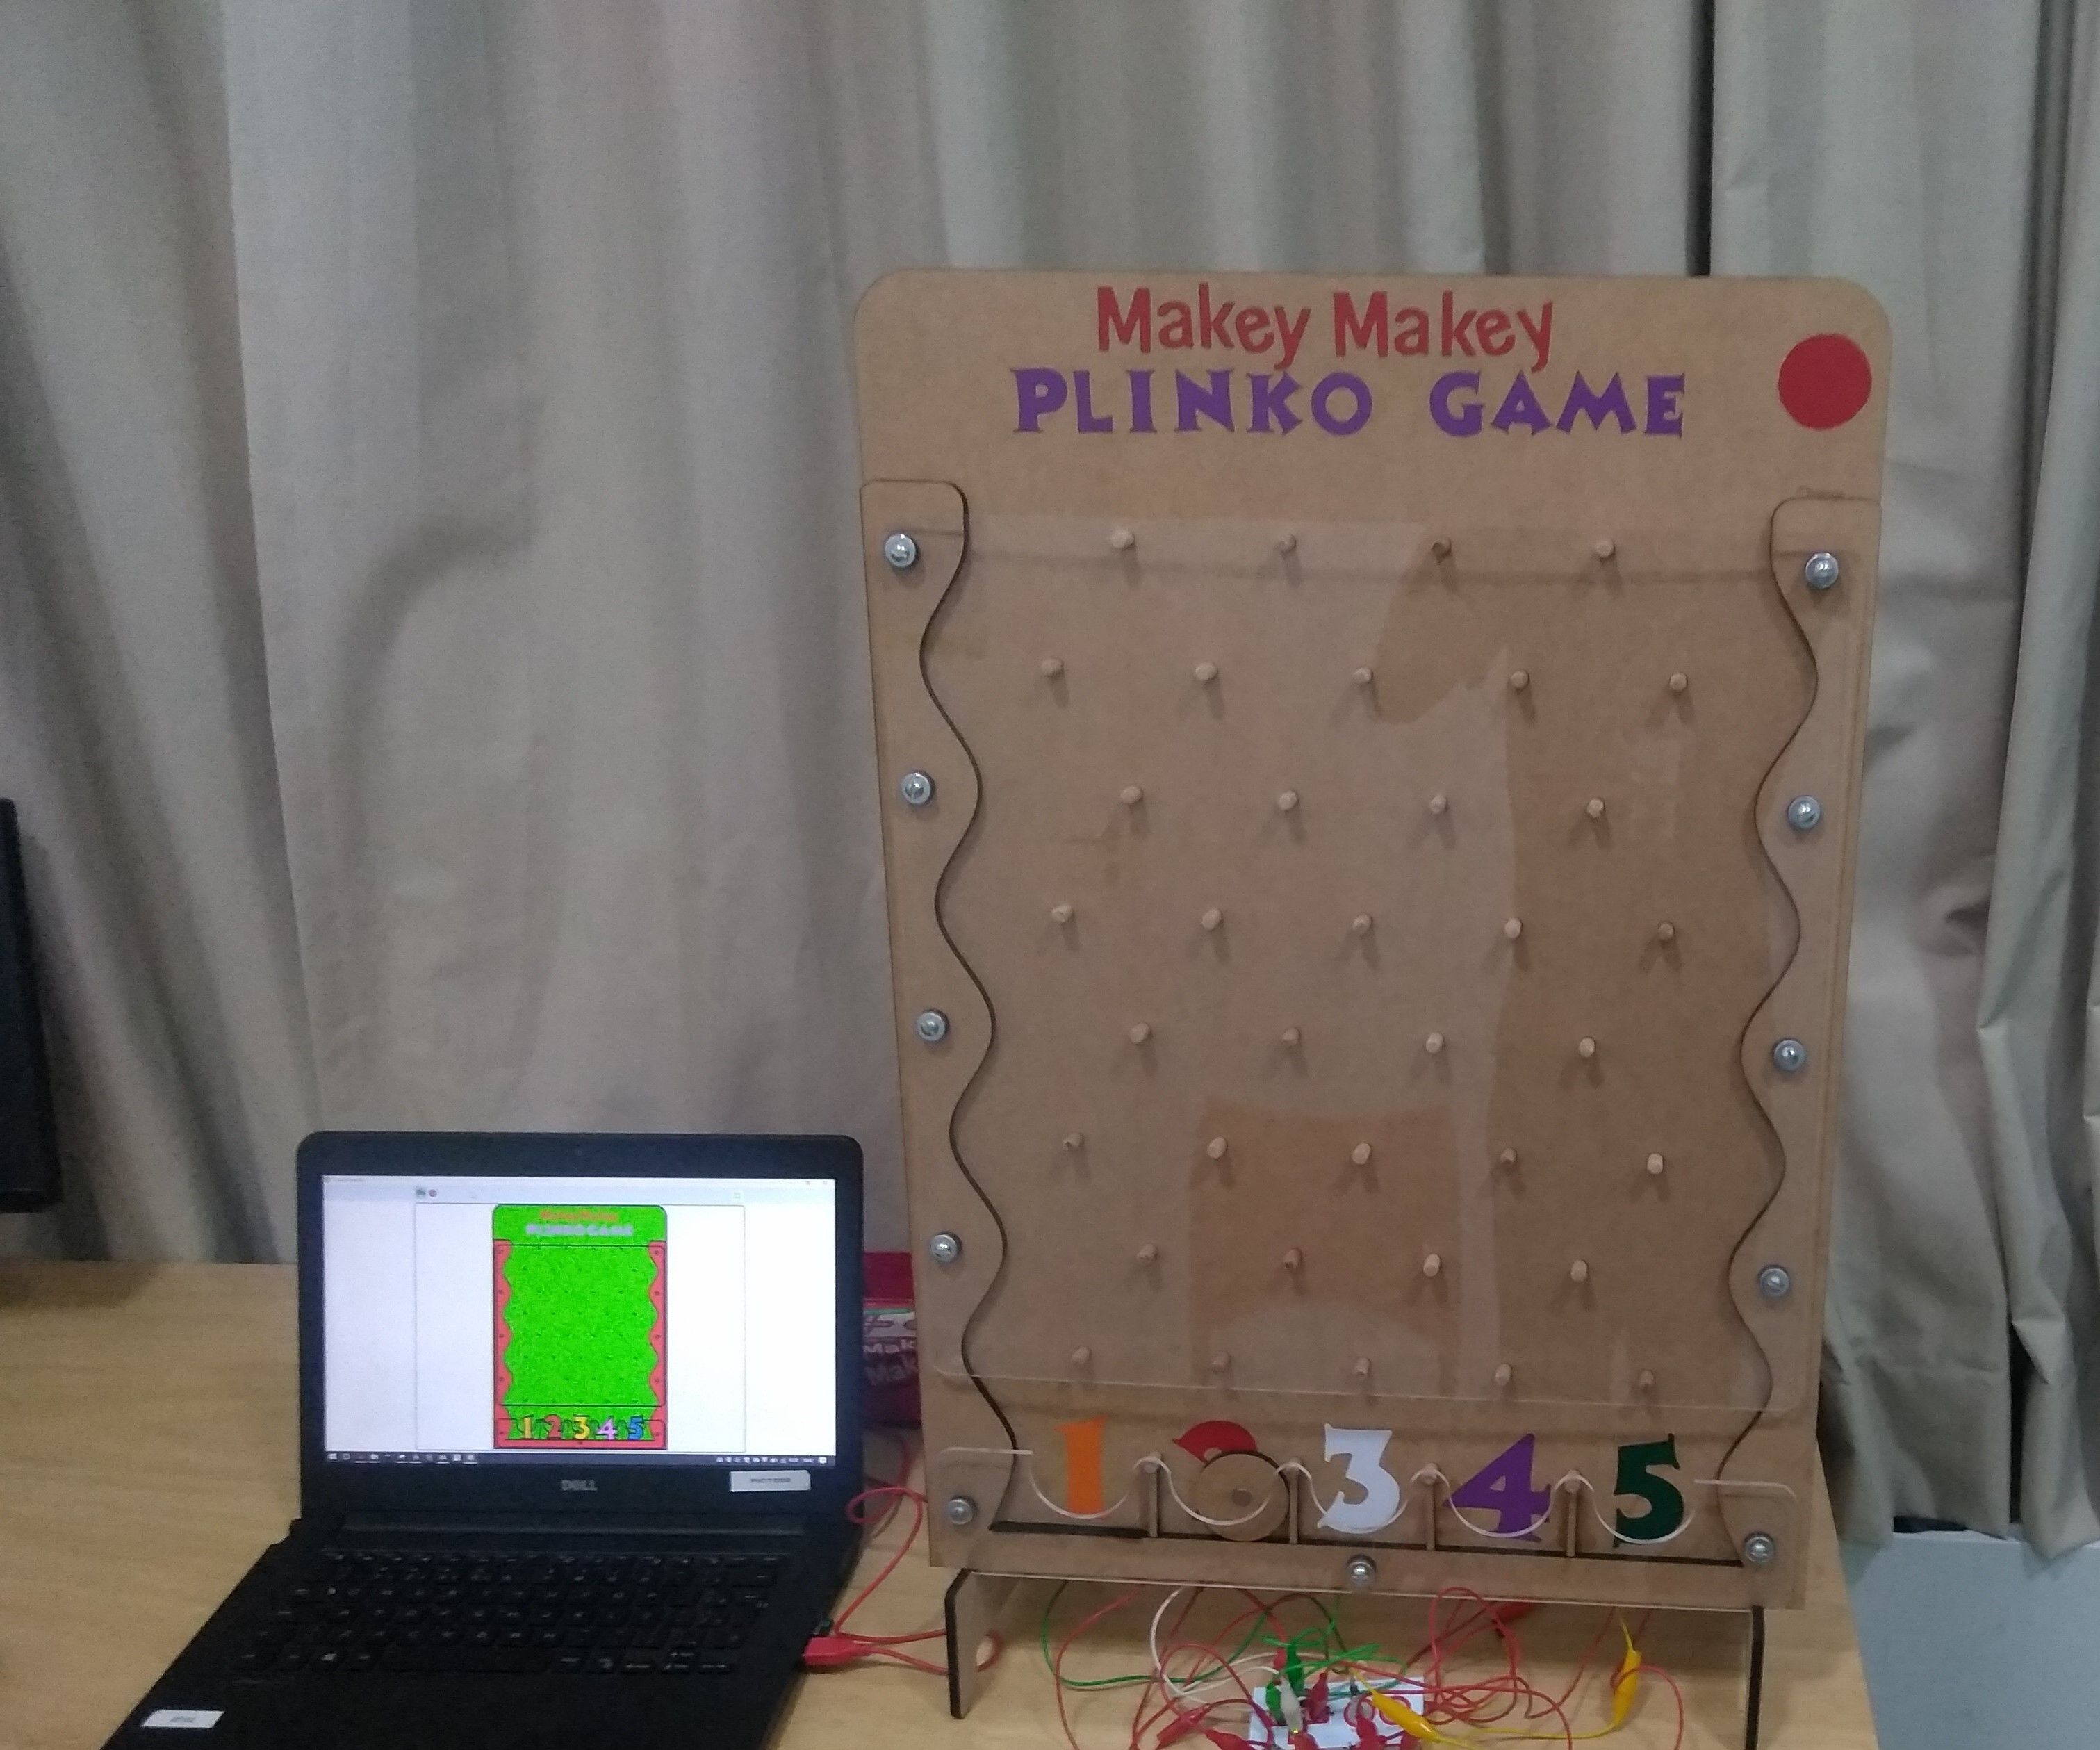 Magnetic Plinko Game With Makey Makey